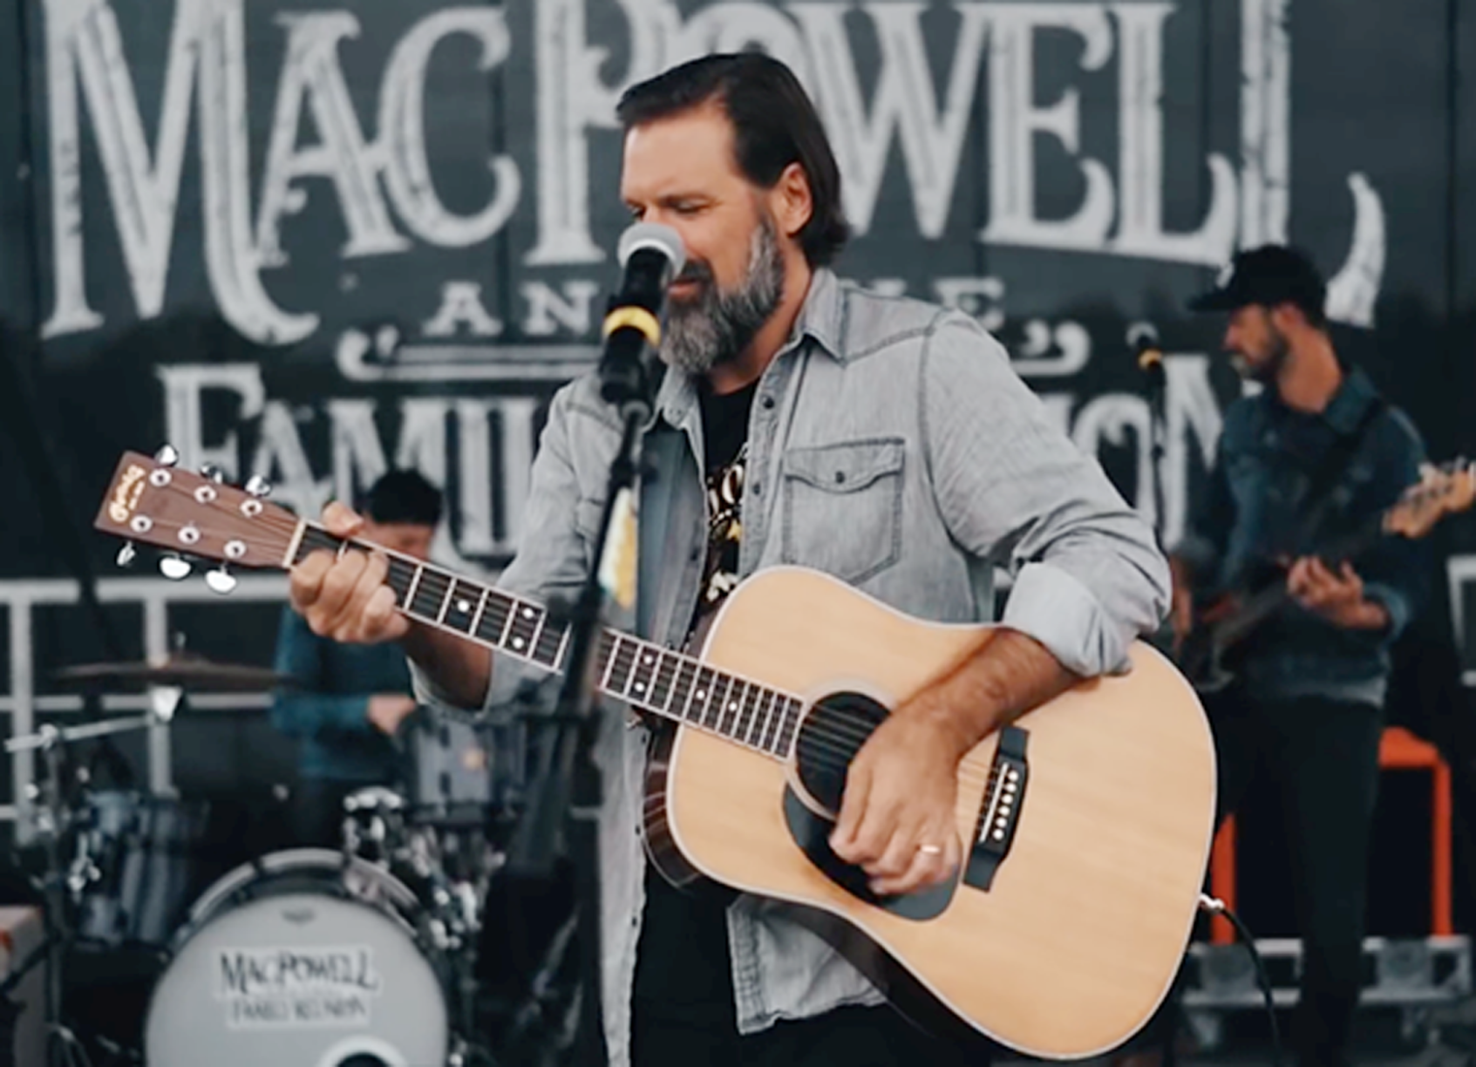 Mac Powell and The Family Reunion next up in acoustic concerts